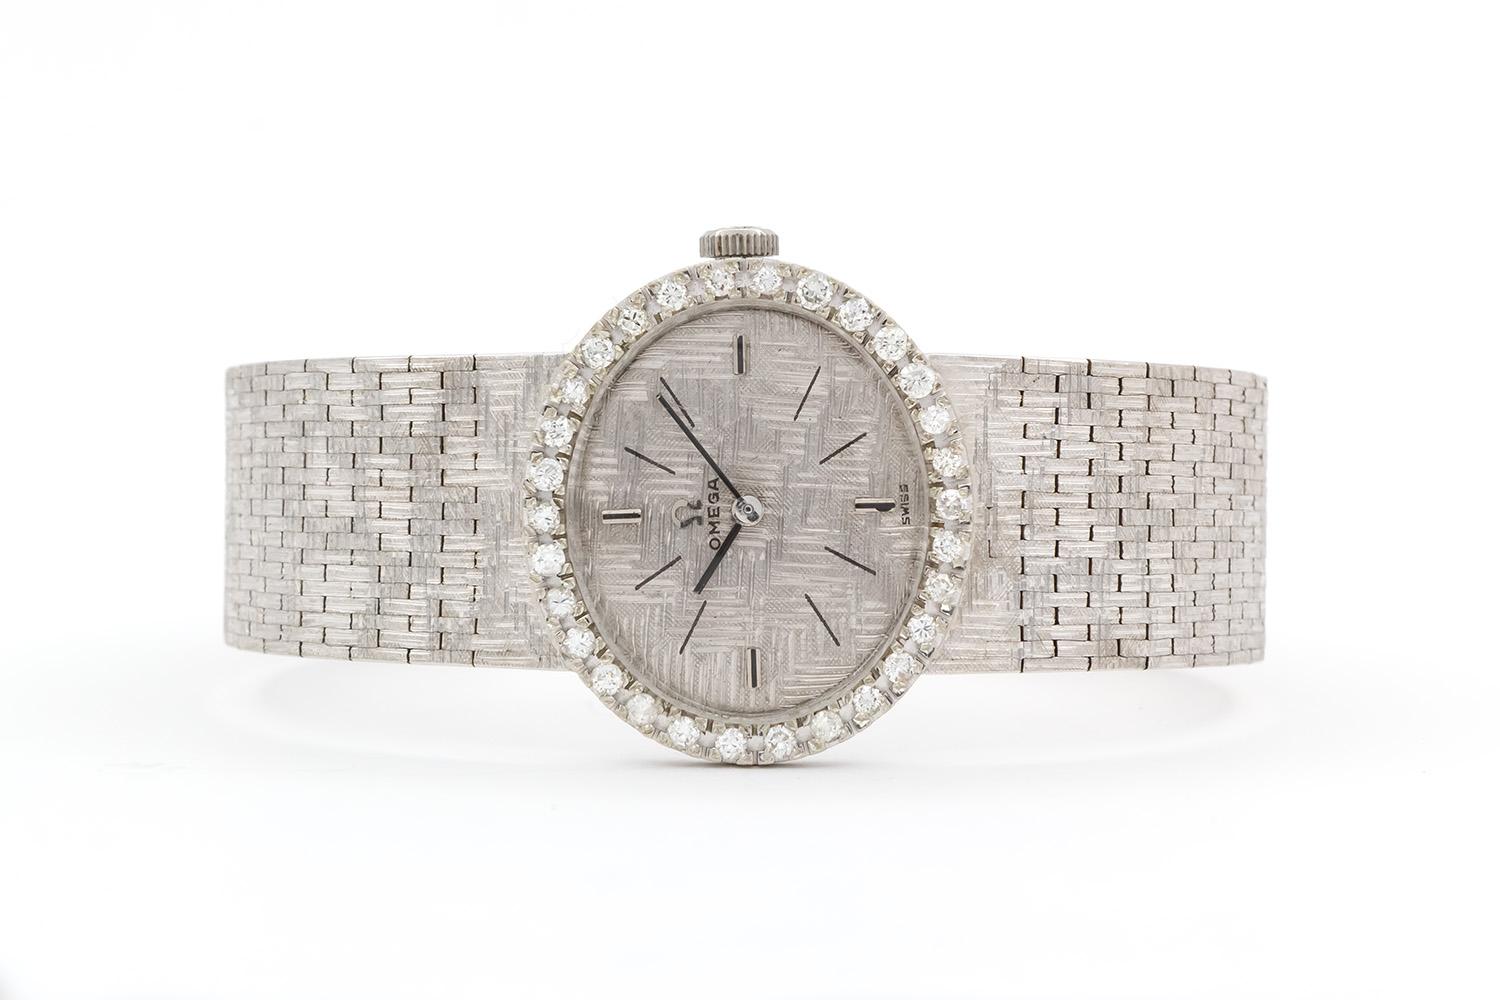 We are pleased to offer this Omega 18k White Gold & Diamond Vintage Lady's Mechanical Wind Dress Watch. These timepieces are characterized by pure styling with luxury finishes, and exude a timeless design. This vintage model features an 18k white